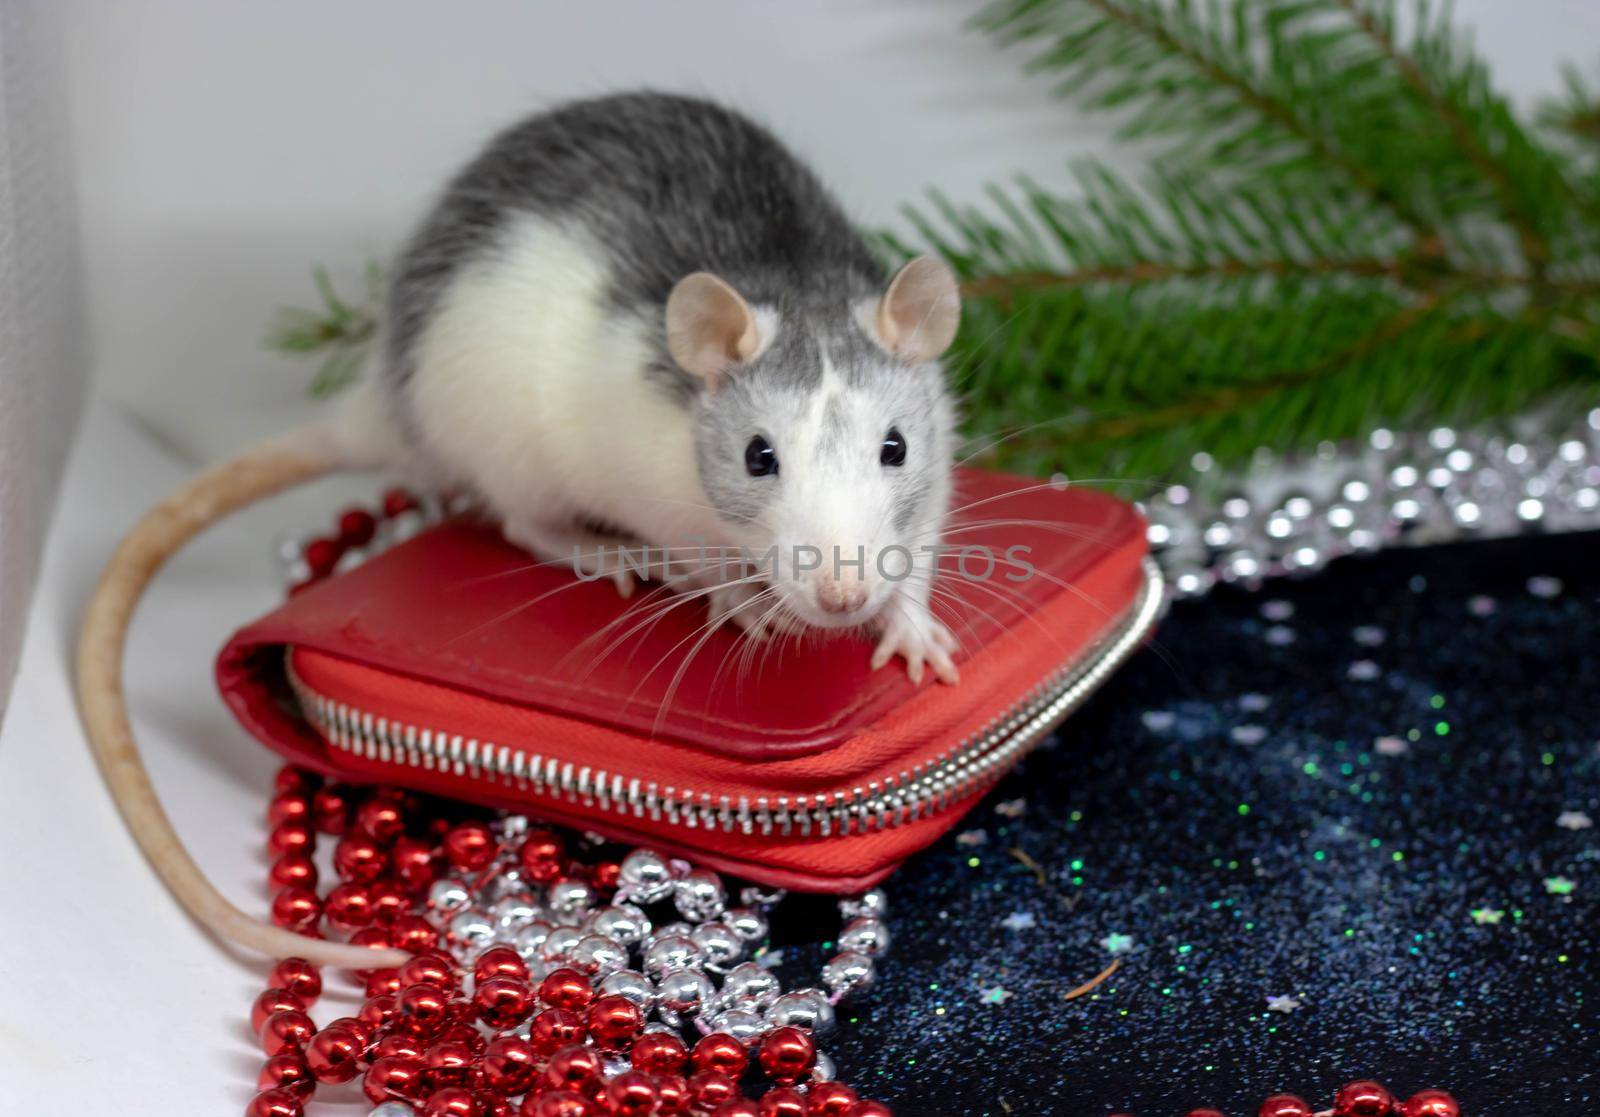 Happy New Year Symbol of 2020 New Year - white or metal silver rat. Cute rat in hat. Lady like. Reflection in mirror. Fun New Year animal, funny pet - rat. Chinese zodiac, eastern horoscope 2020.festive